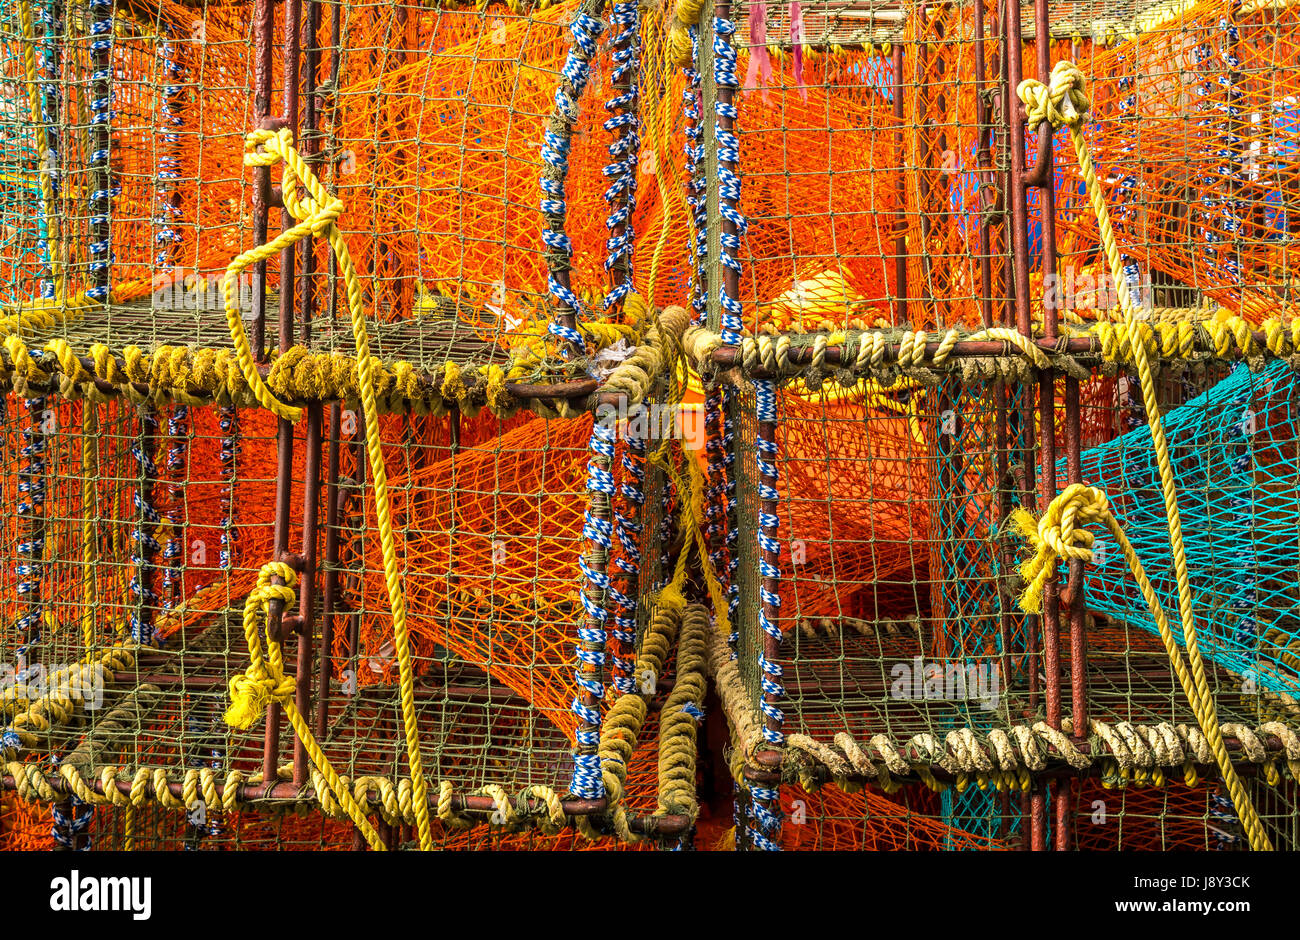 Close up of colourful lobster pots, cages or creels, Western Cape, South Africa Stock Photo